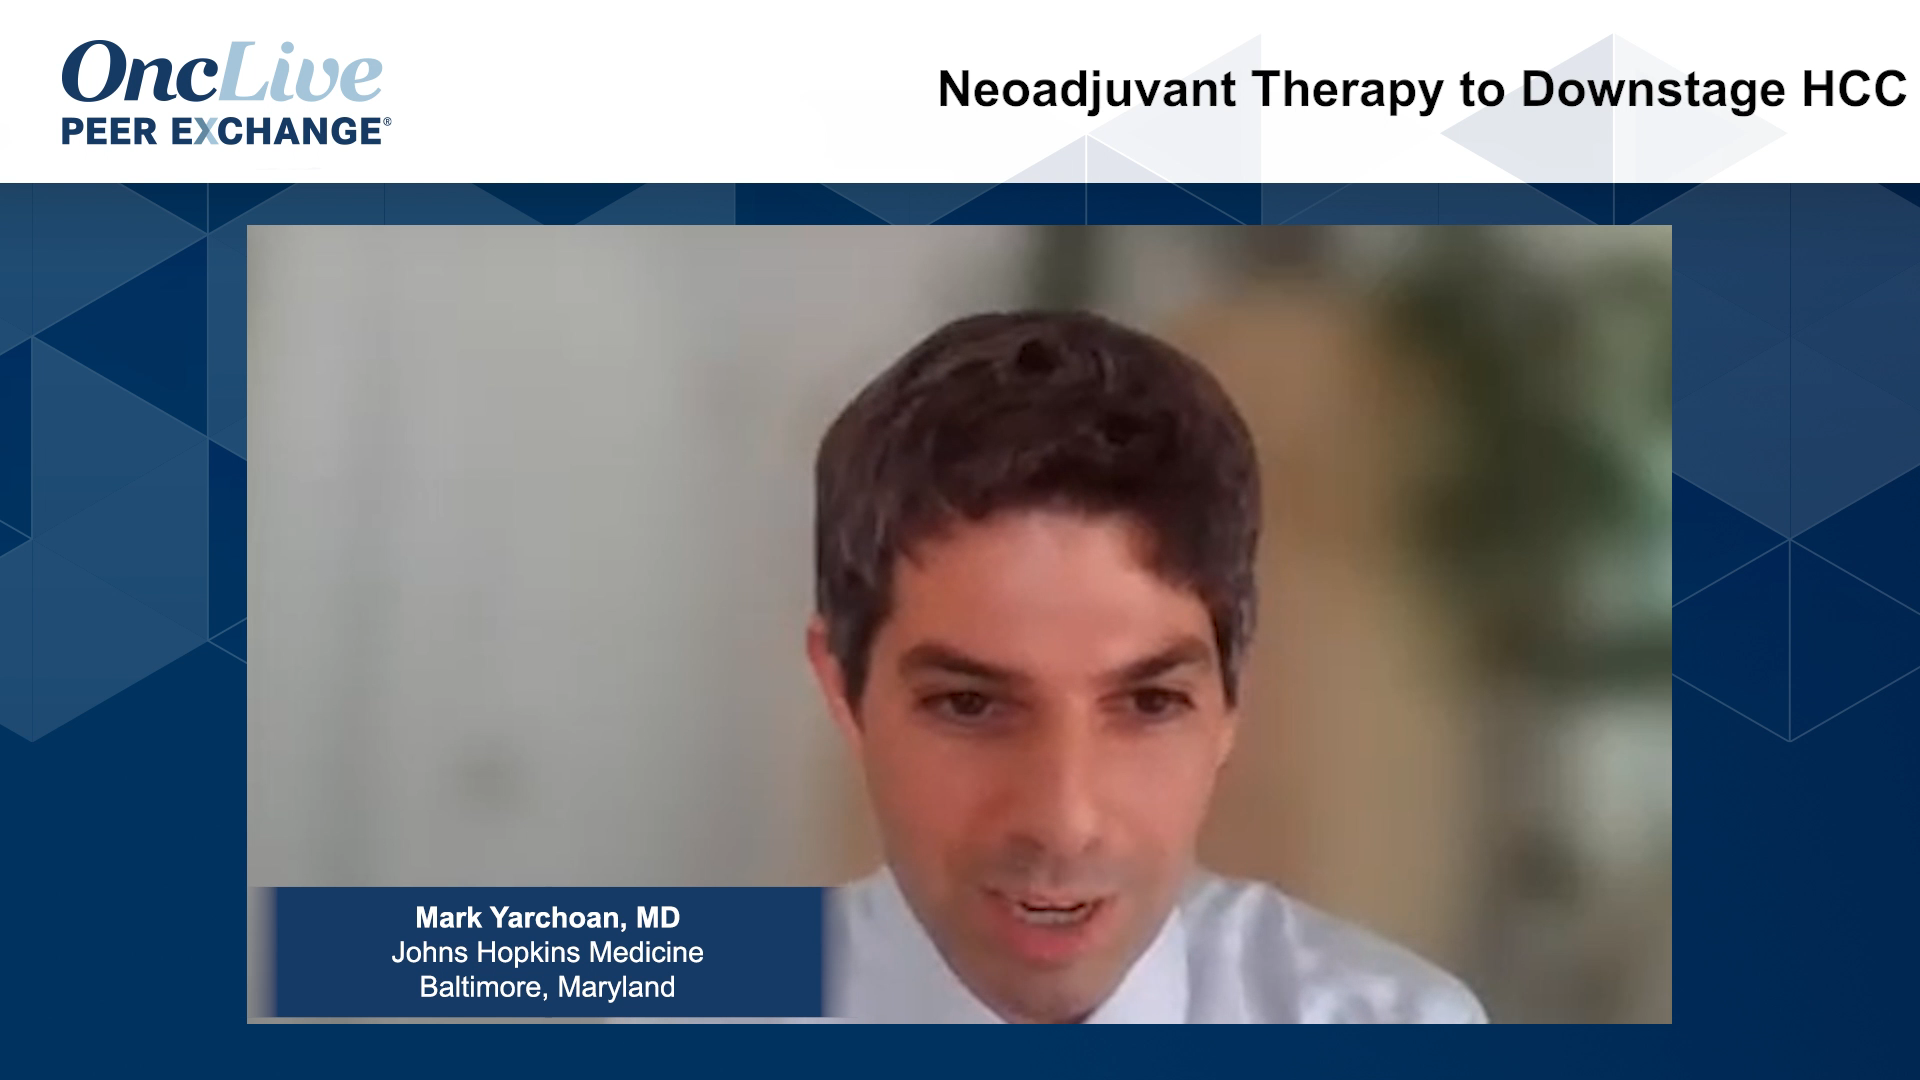 Neoadjuvant Therapy to Downstage HCC